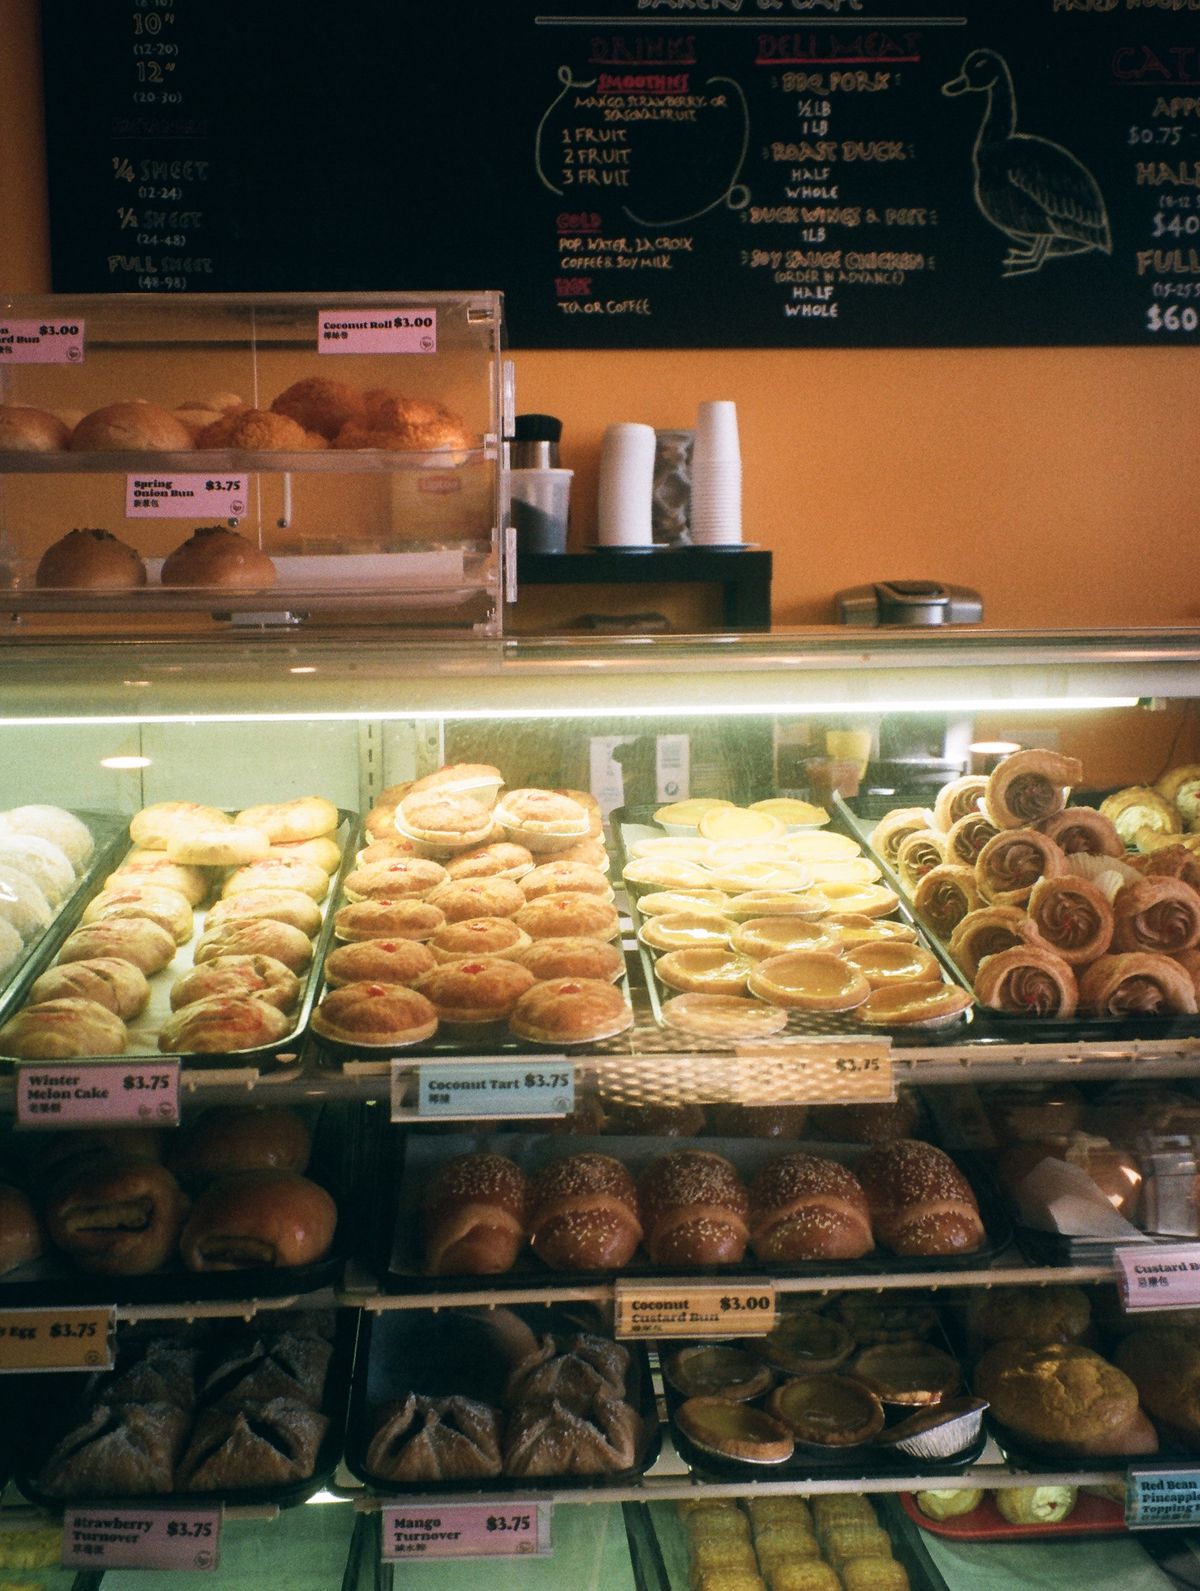 A pastry case full of Chinese pastries, with an orange wall and chalkboard in the background.